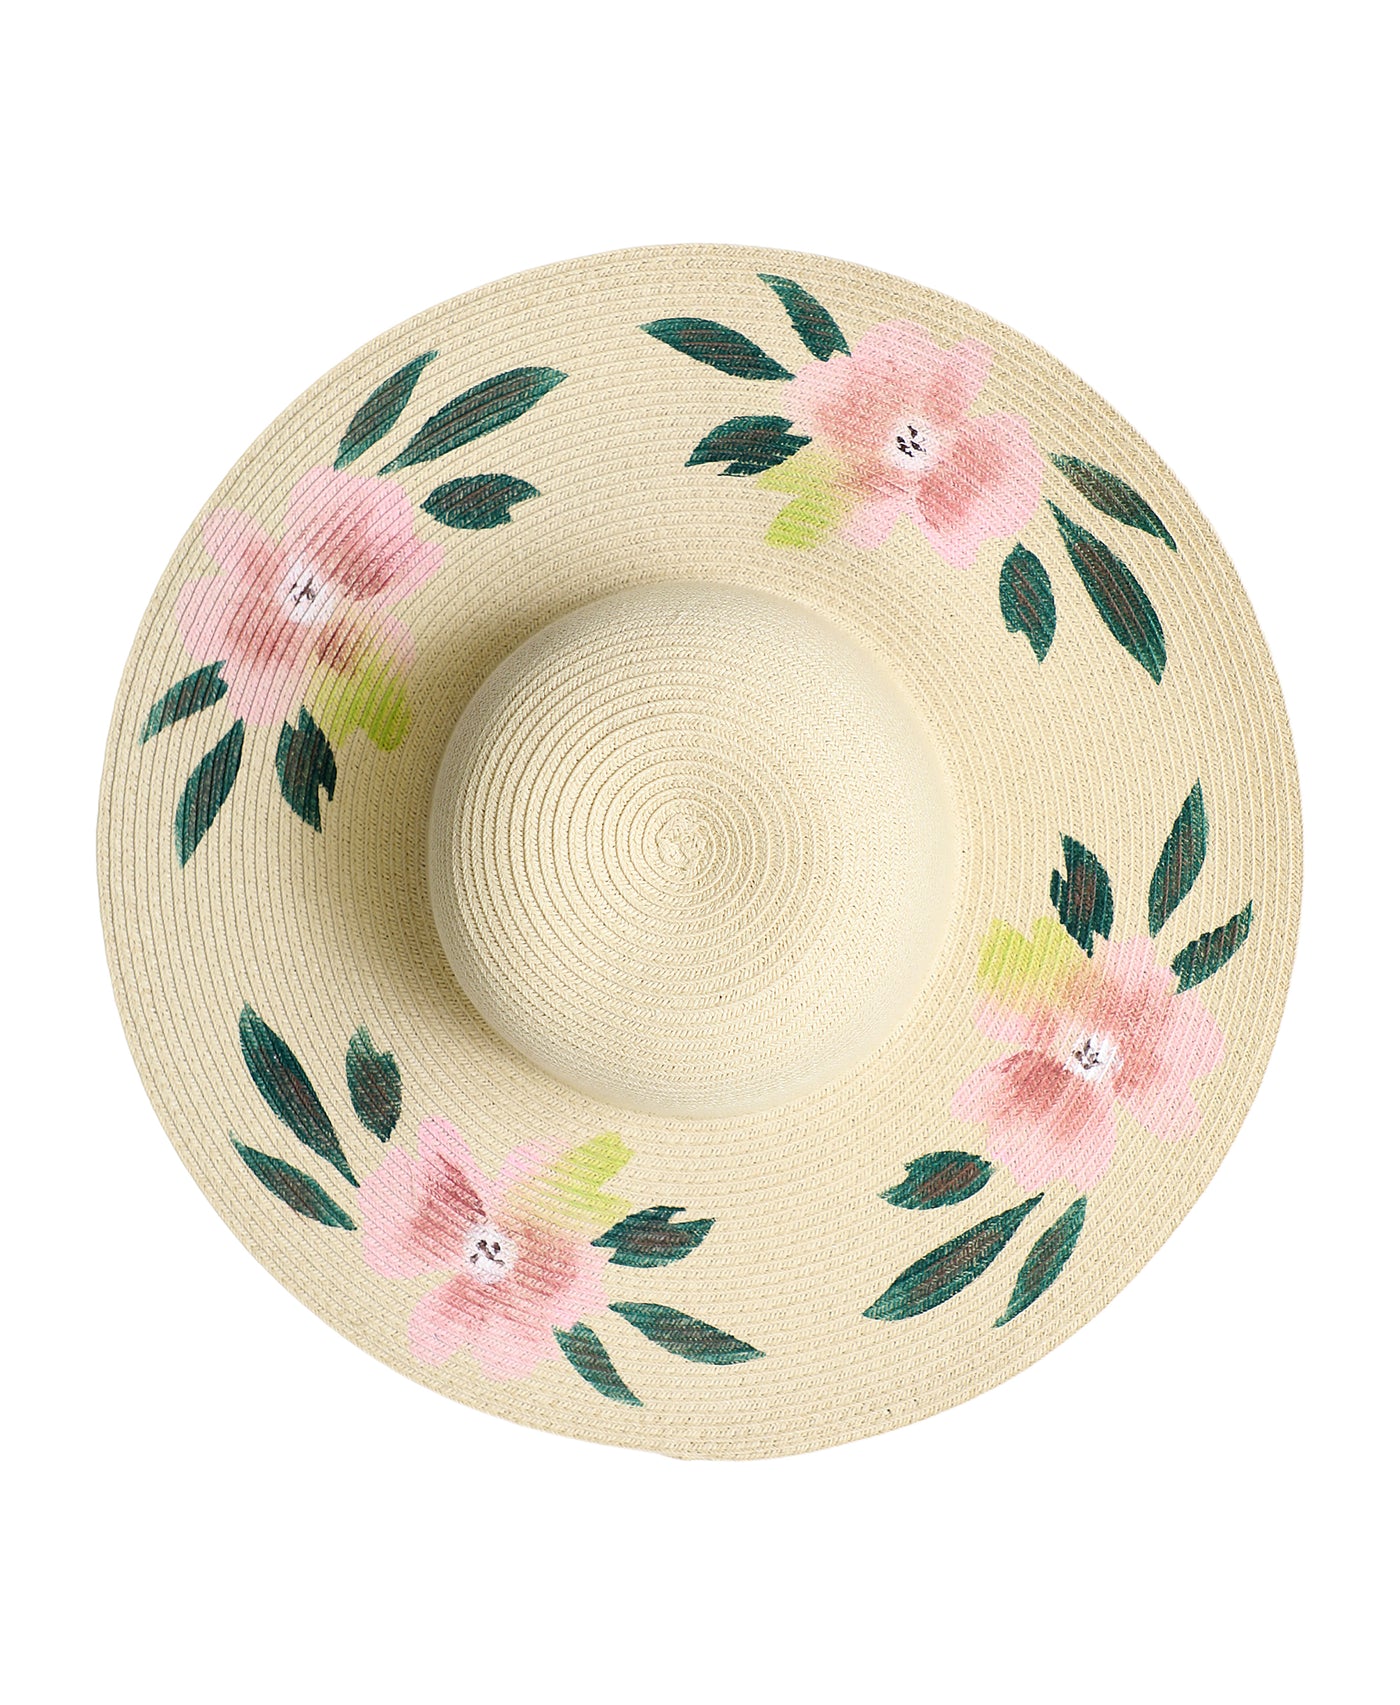 Straw Hat w/ Painted Flower image 1